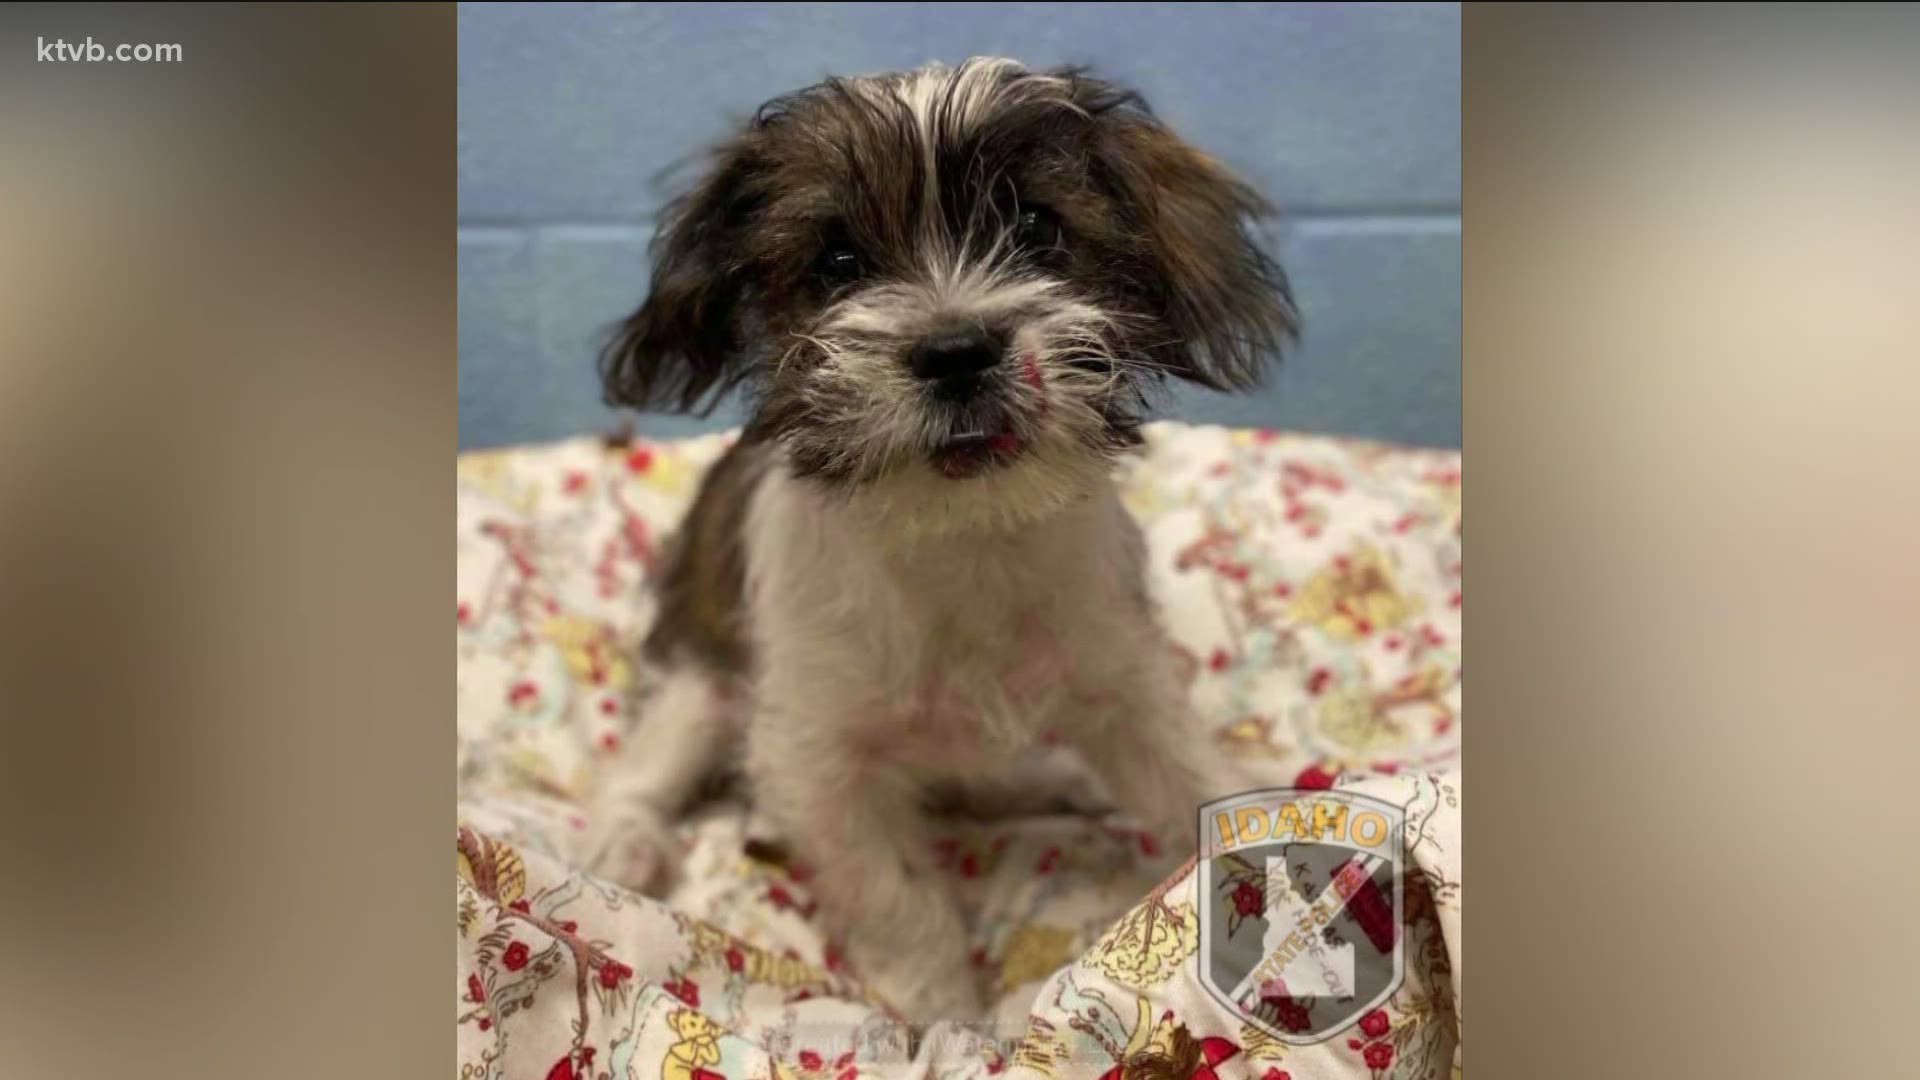 The West Valley Humane Society told KTVB that "Panda" the puppy will be reunited with its owner on Thursday after he undergoes a neuter procedure.